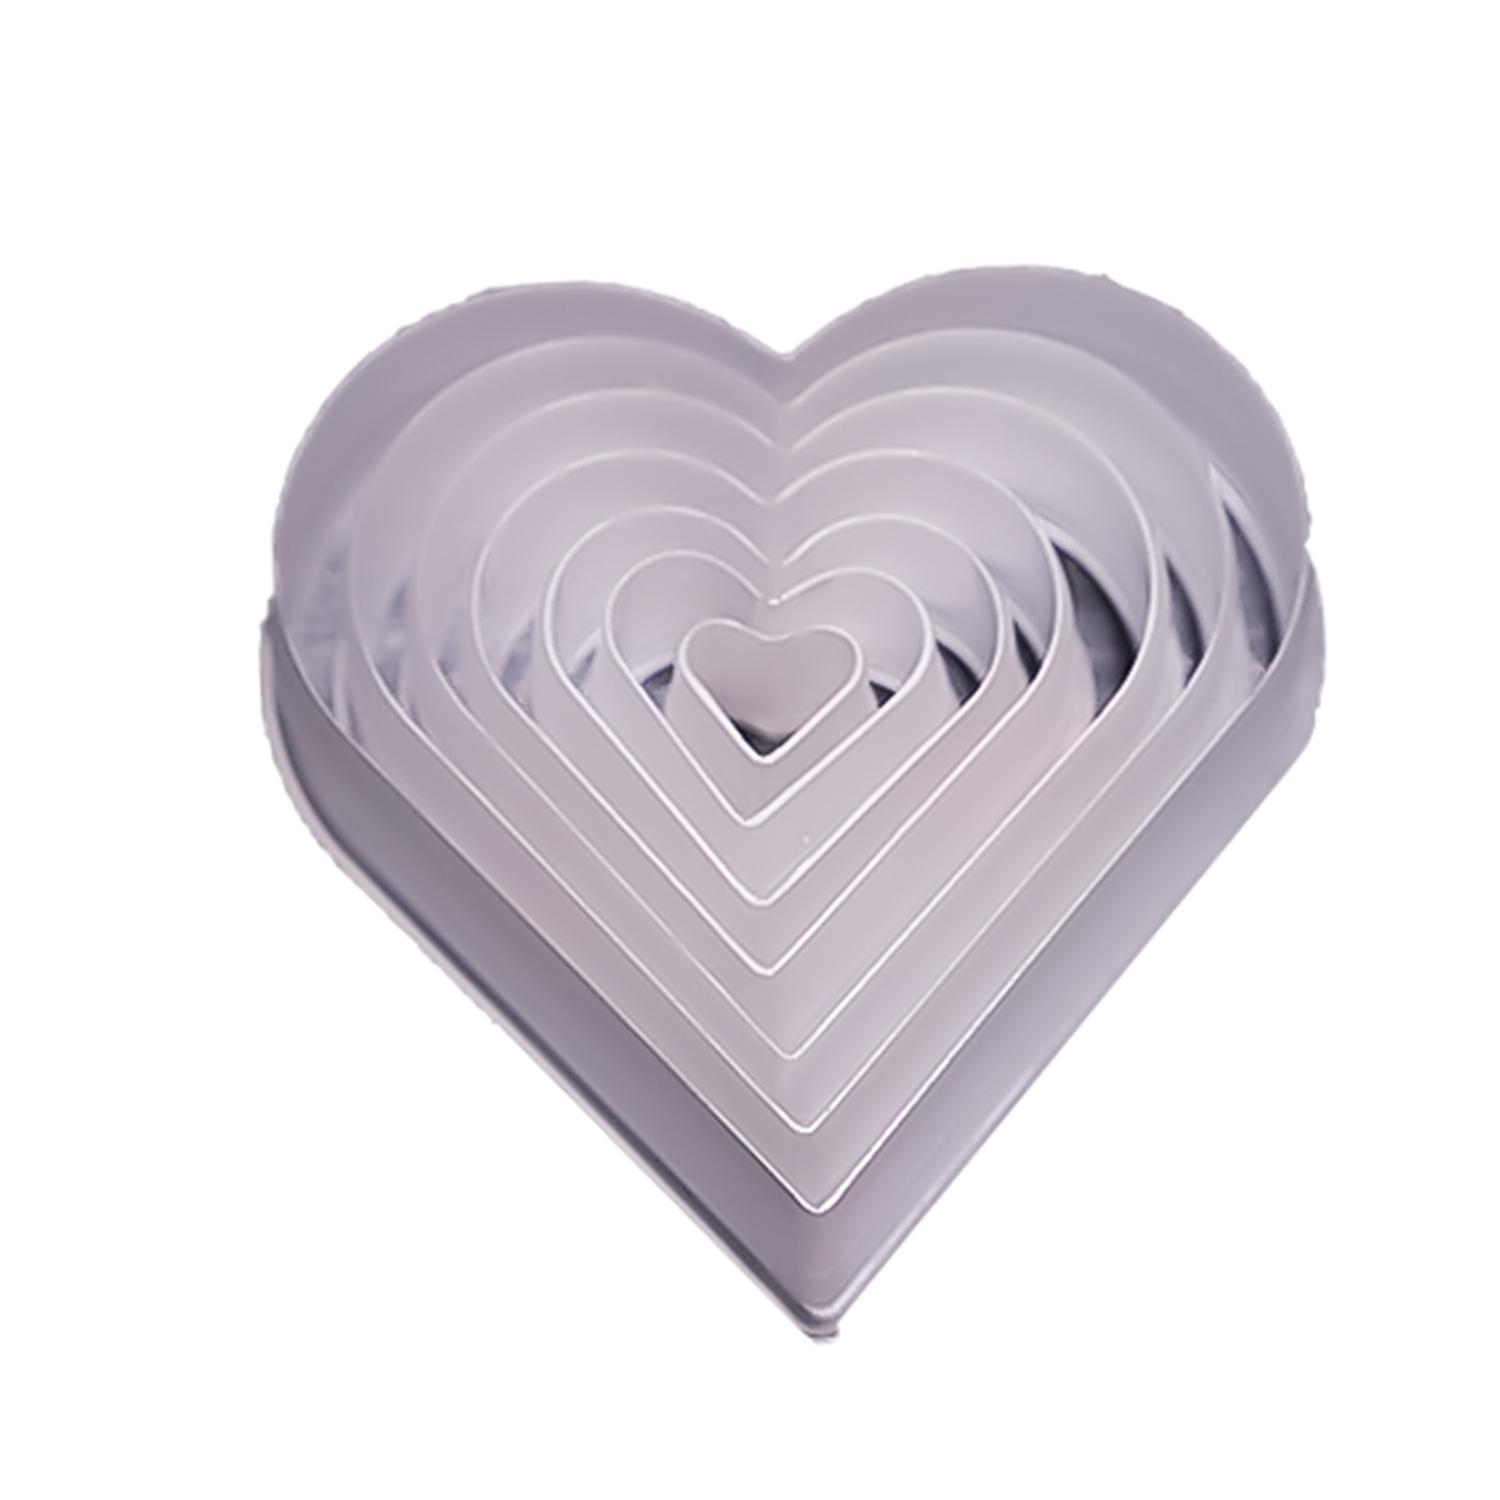 SET OF 7 CLEAR SMOOTH EDGE HEART PLASTIC COOKIE CUTTER